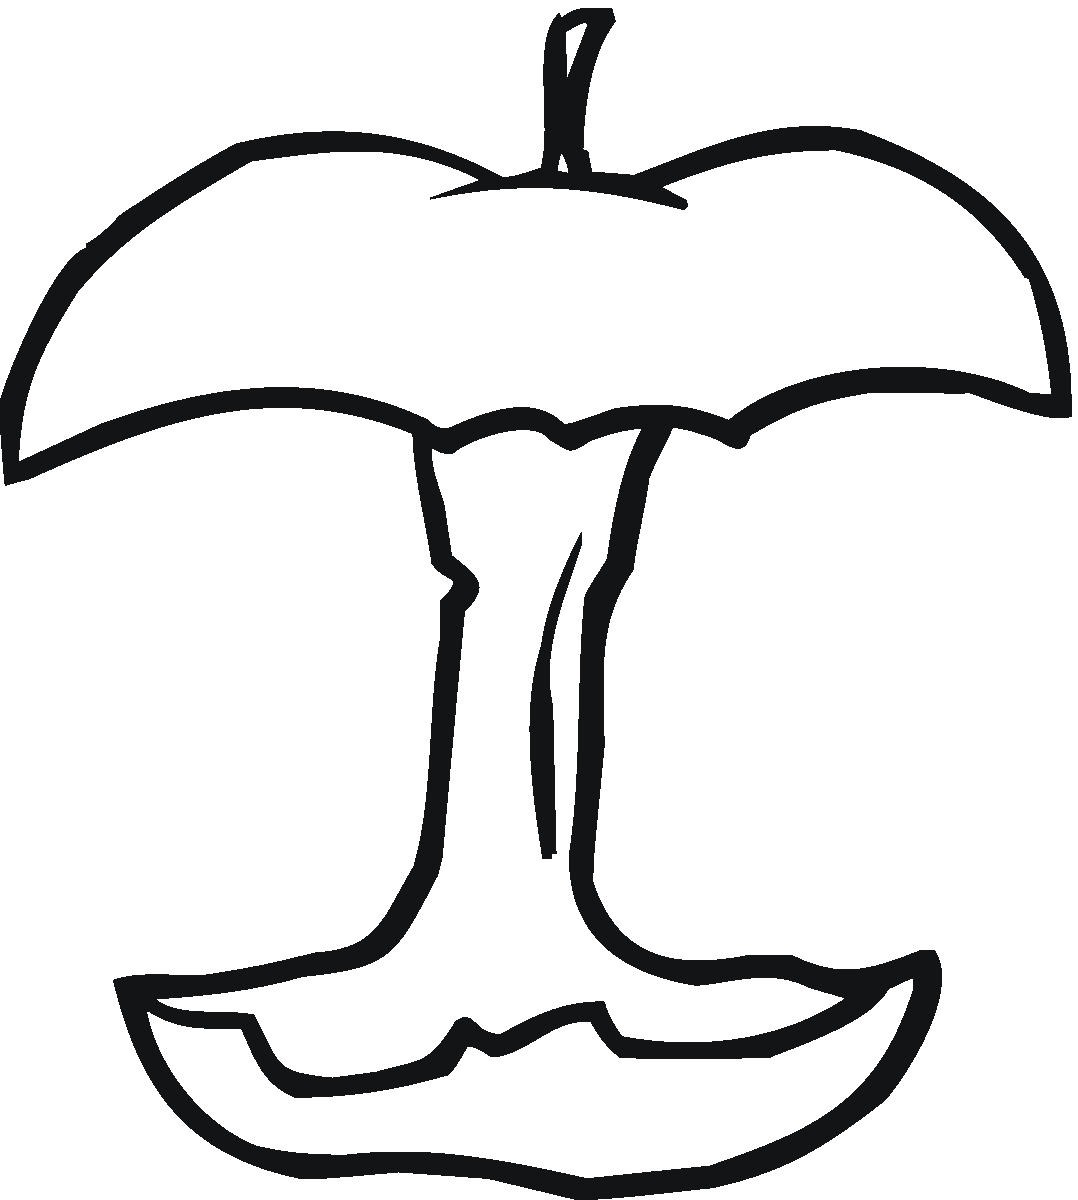 Download 21 Best Apples Coloring Pages for Kids - Updated 2018